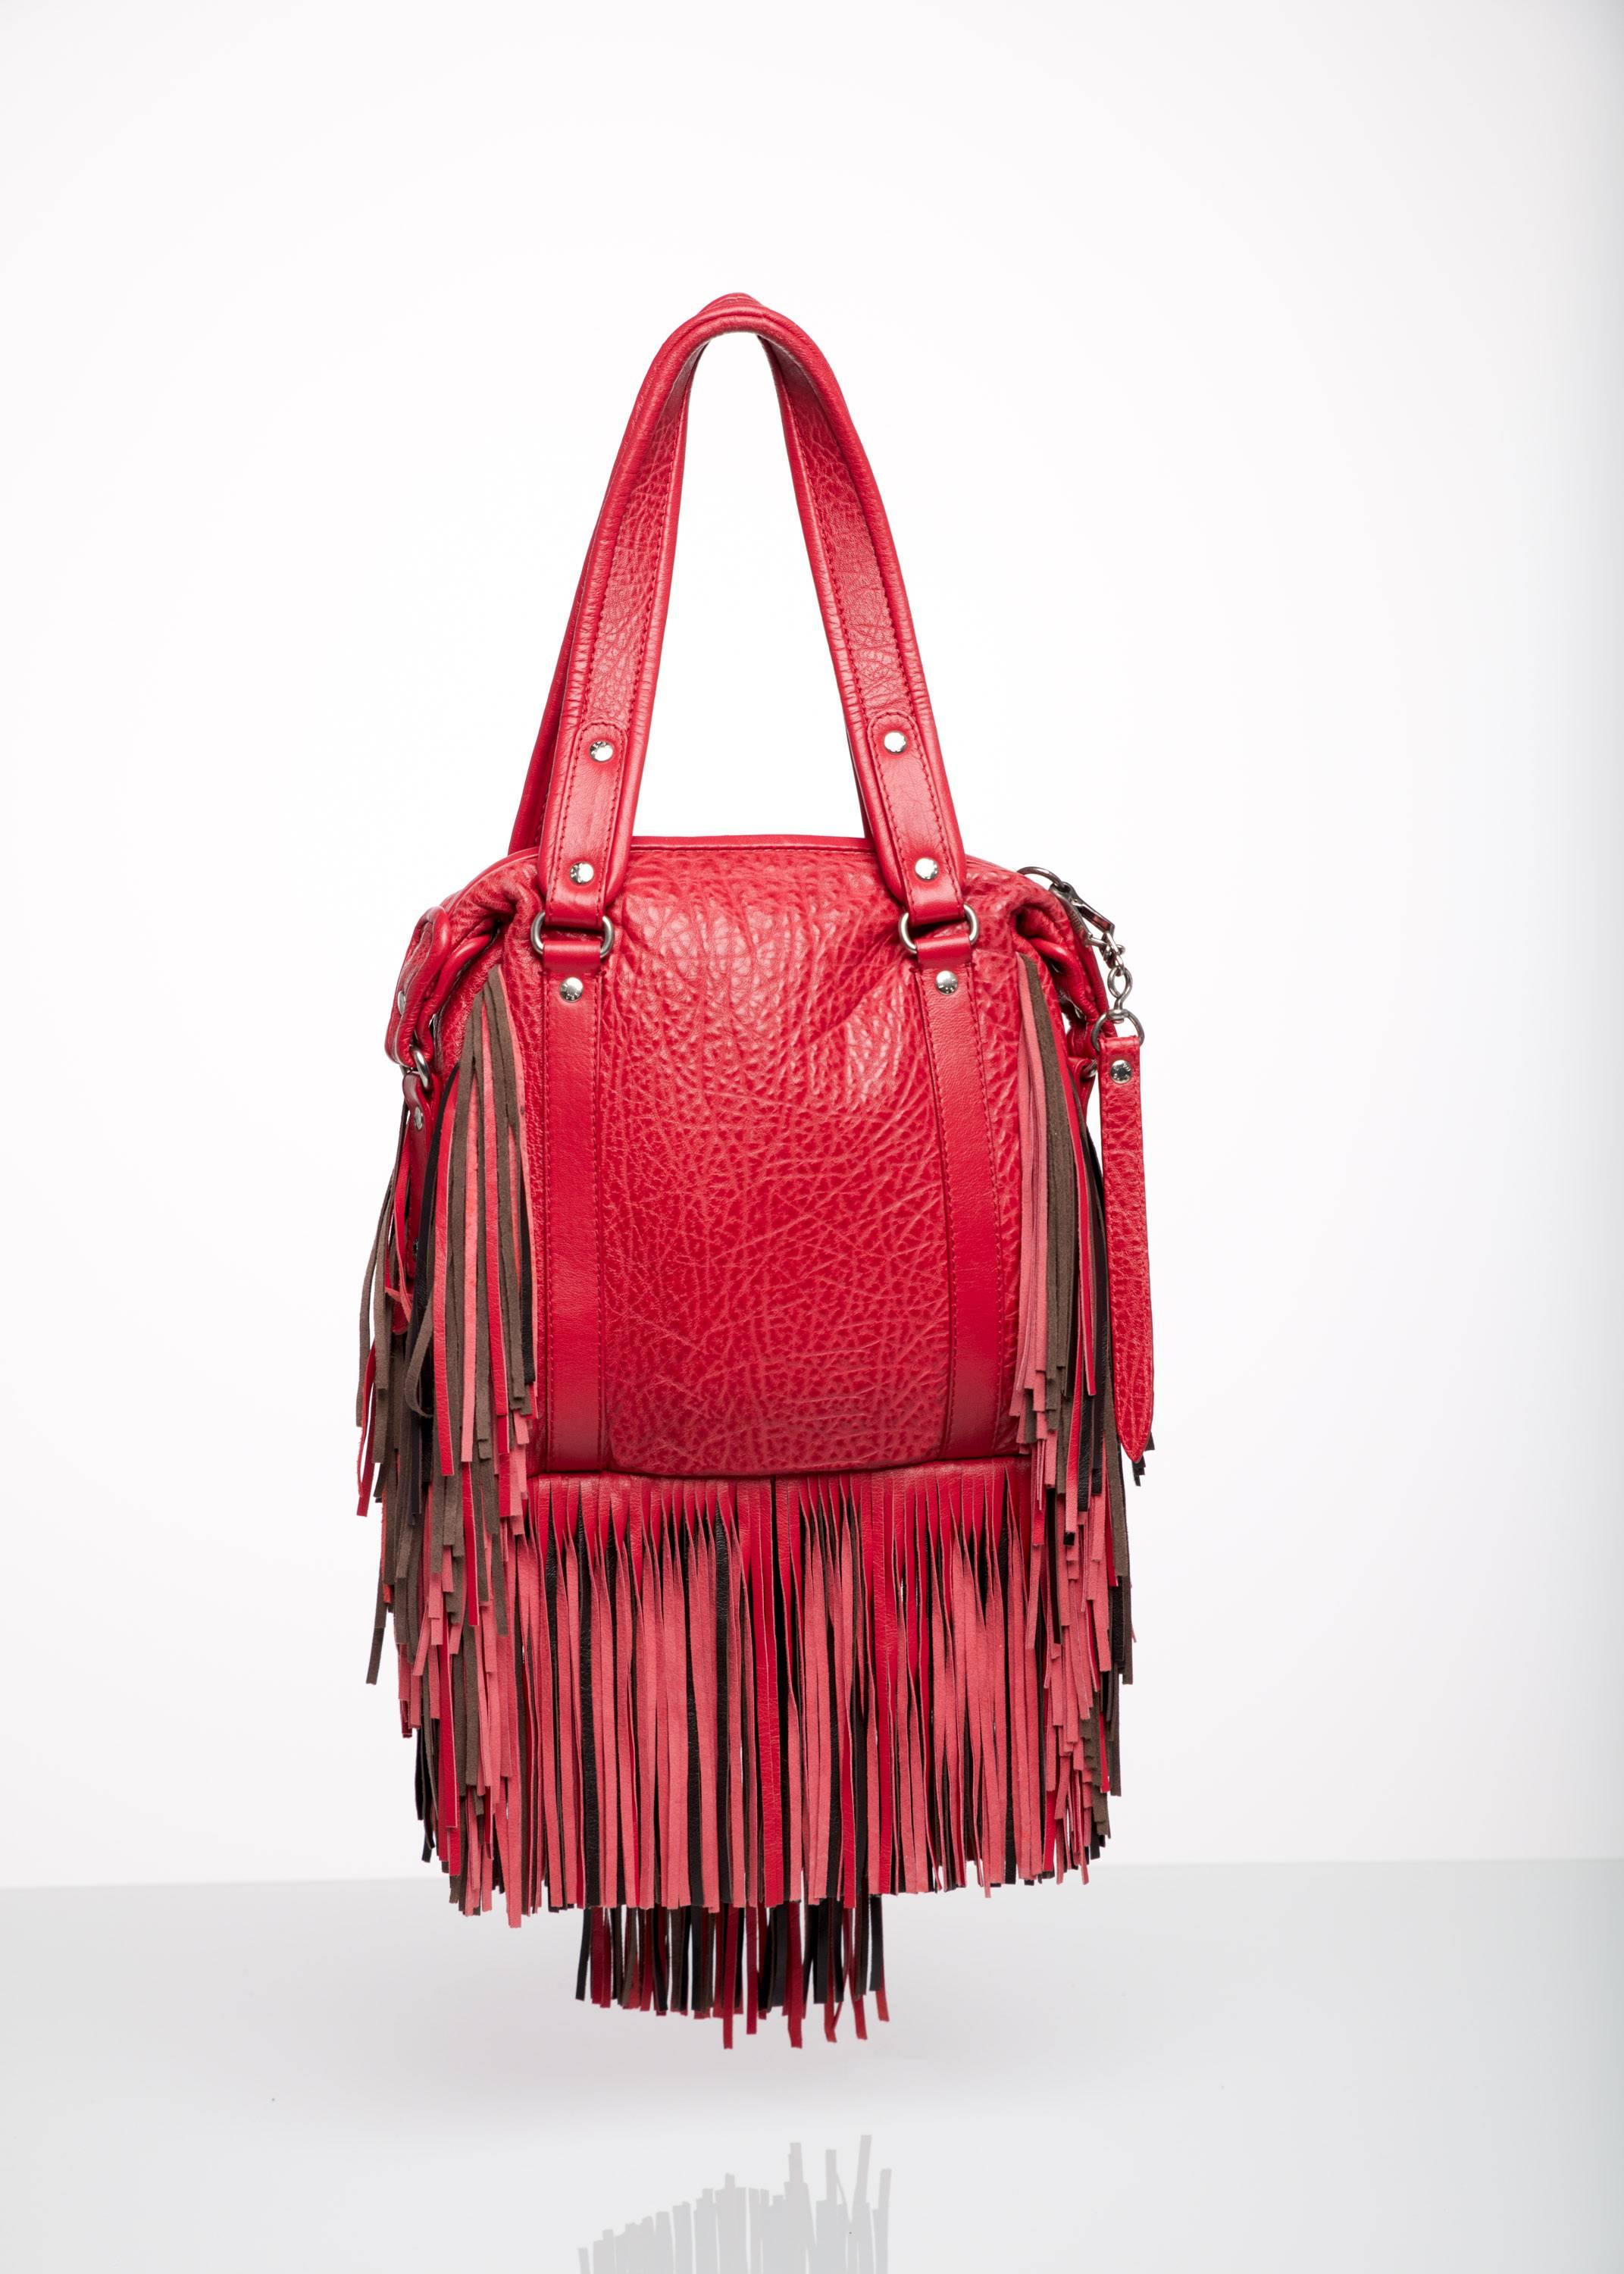 2008 Etro Runway Campaign Red Leather Fringe Shoulder Bag In Good Condition In Boca Raton, FL